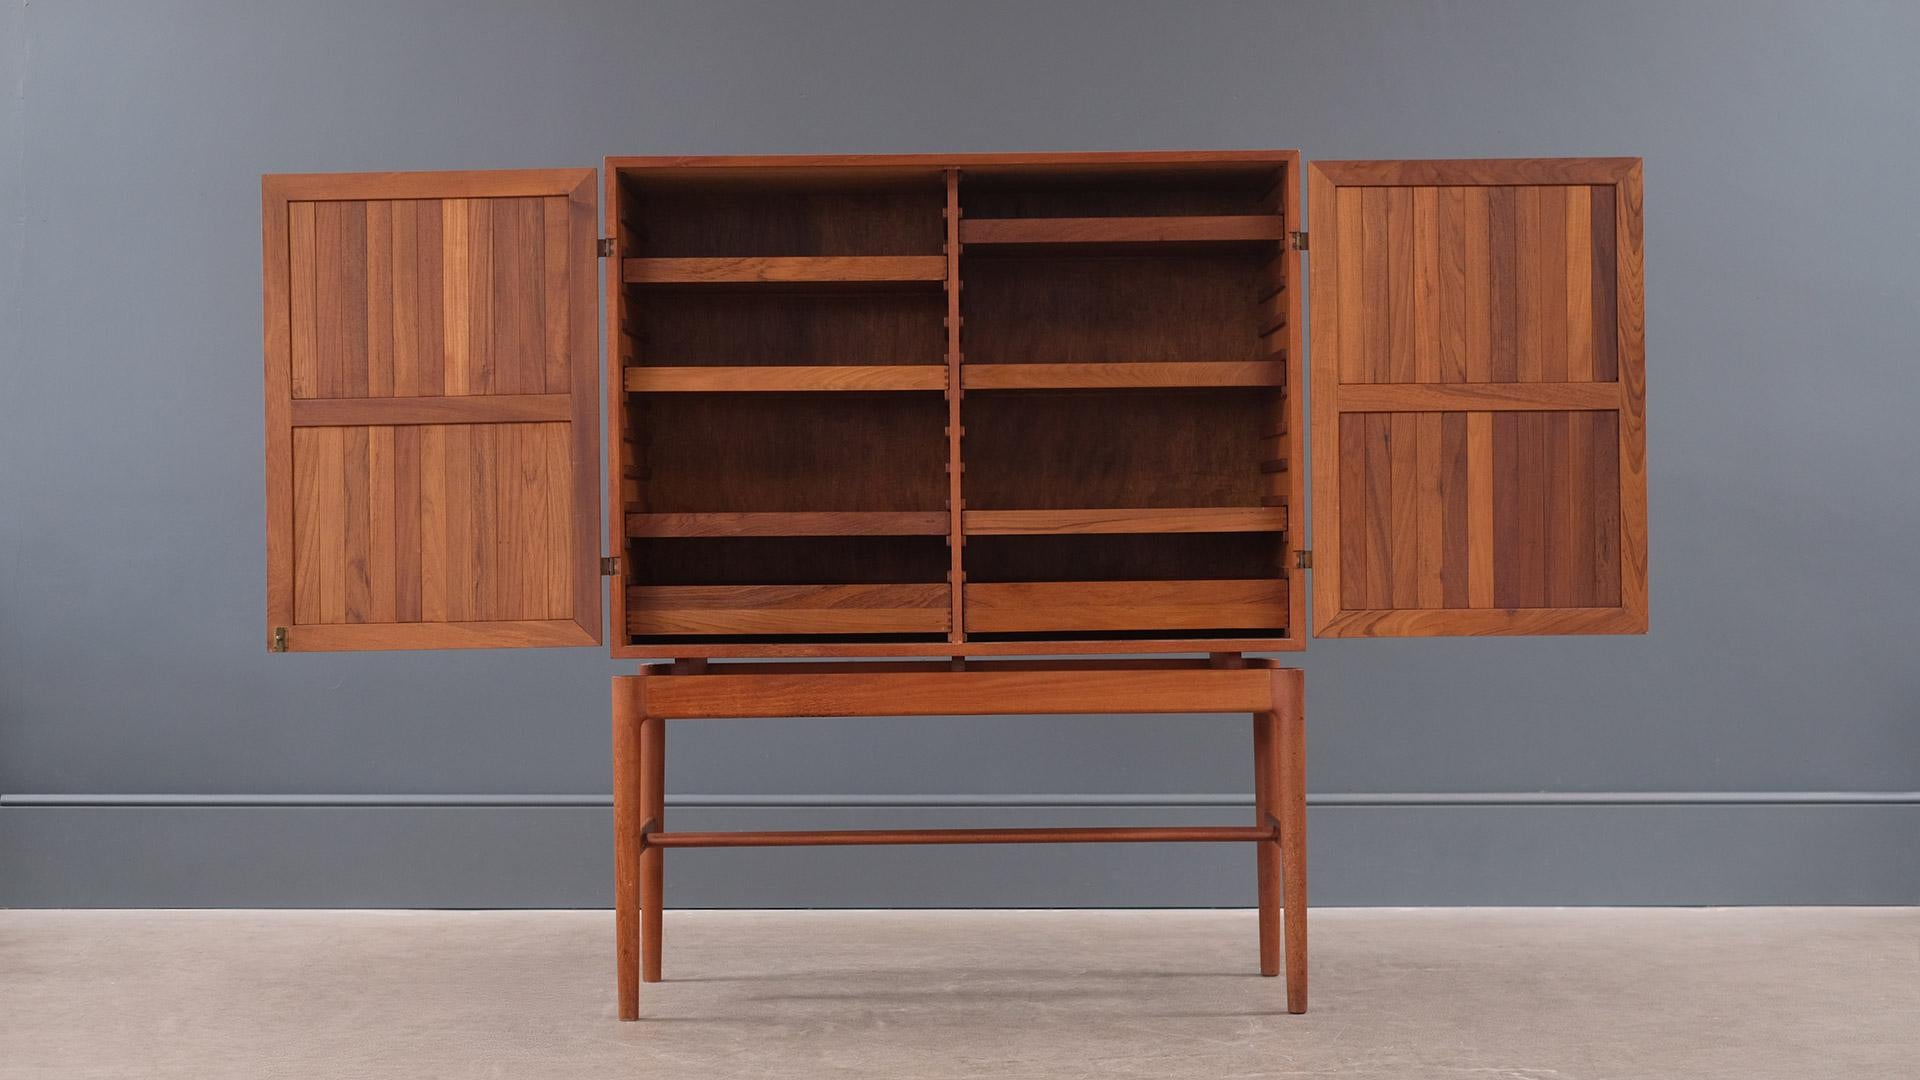 Outstanding 1950s linen cabinet in teak with exposed brass hinges by a Danish cabinet maker. Ultra high quality and in mostly solid timber this piece is super elegant and has real presence. Beautiful.